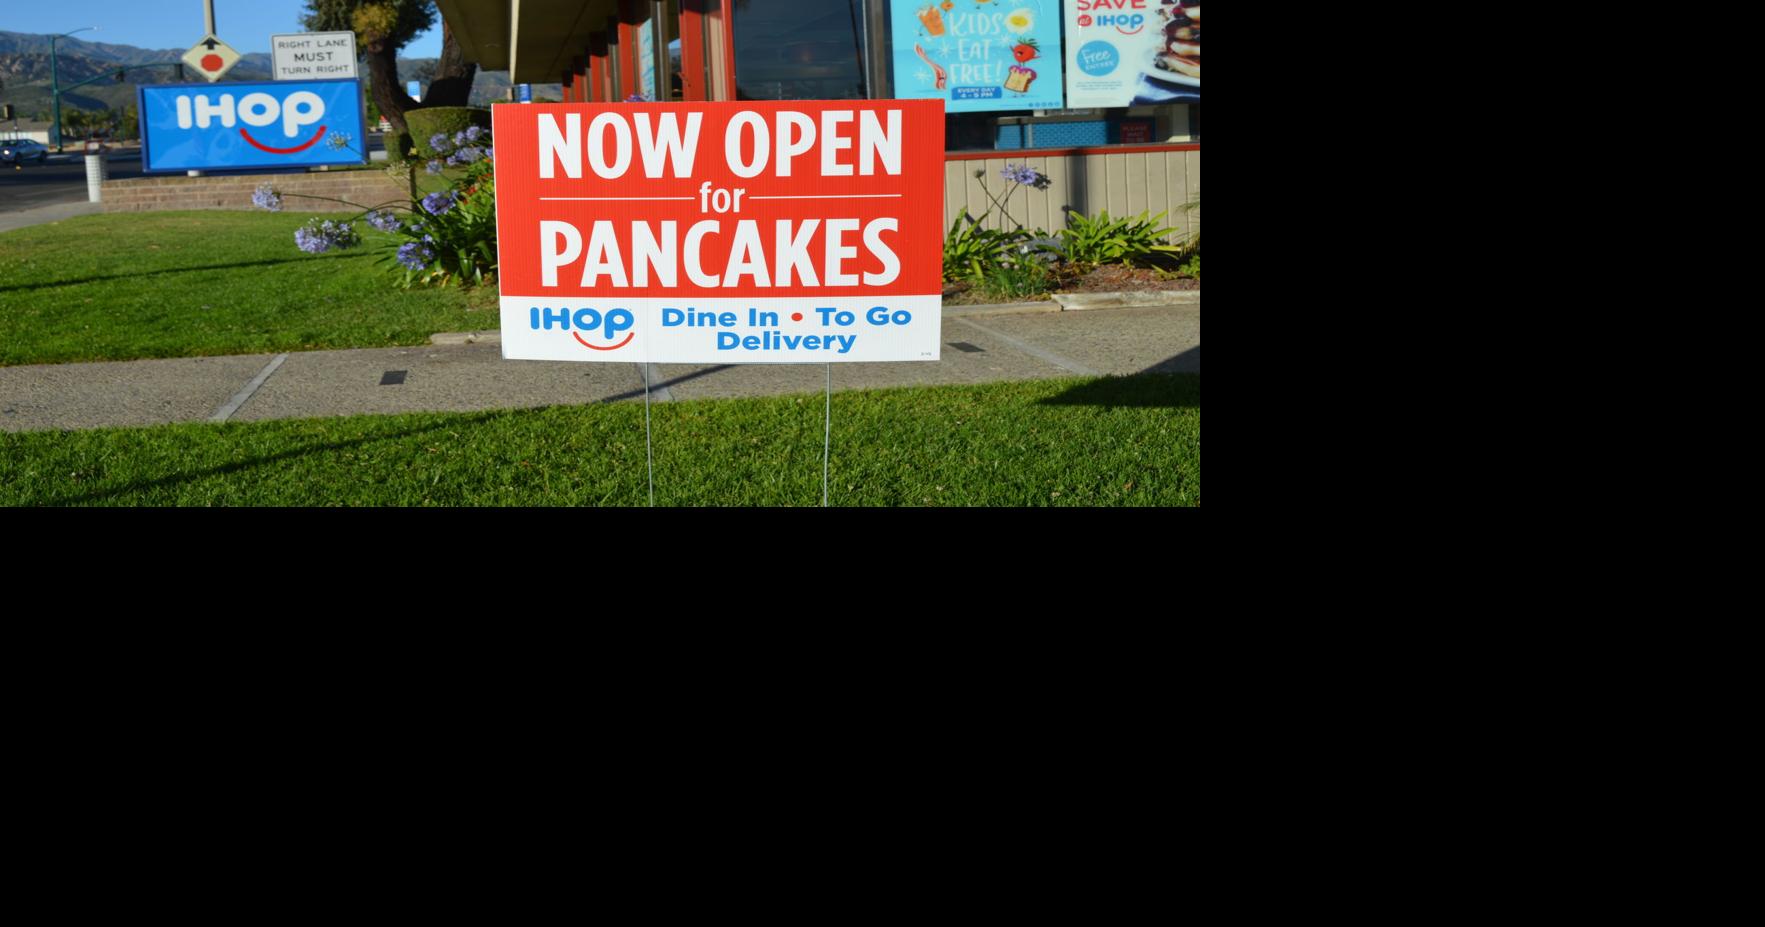 Assembly Street IHOP reopens under new ownership after seven month